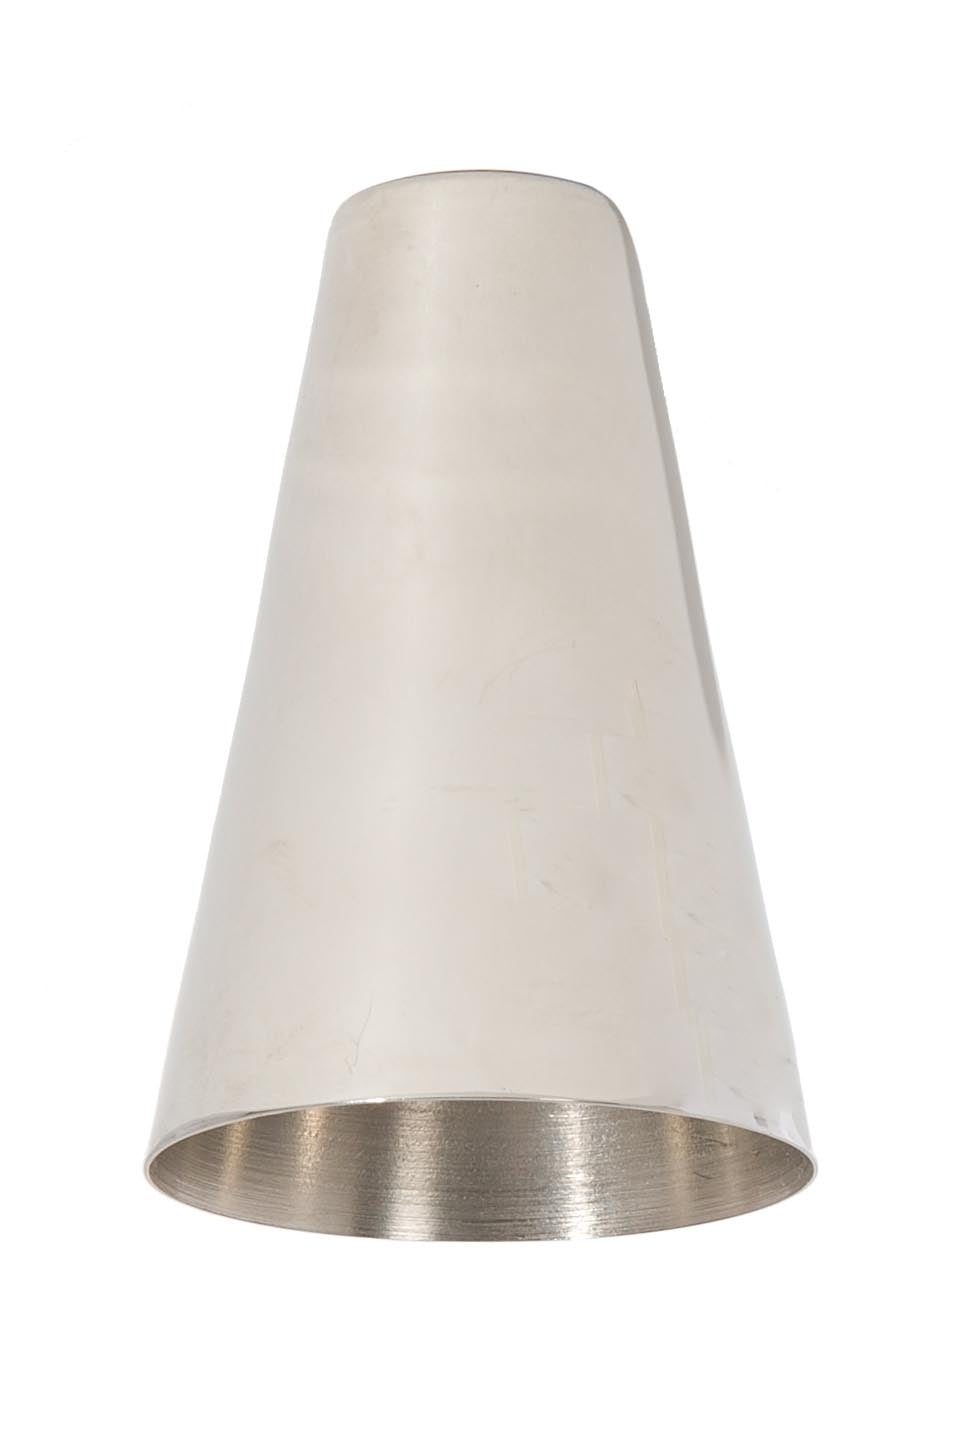 3-3/8 Inch Tall Polished Nickel Finish Brass Cone Lighting Socket Cup, 1/8IP